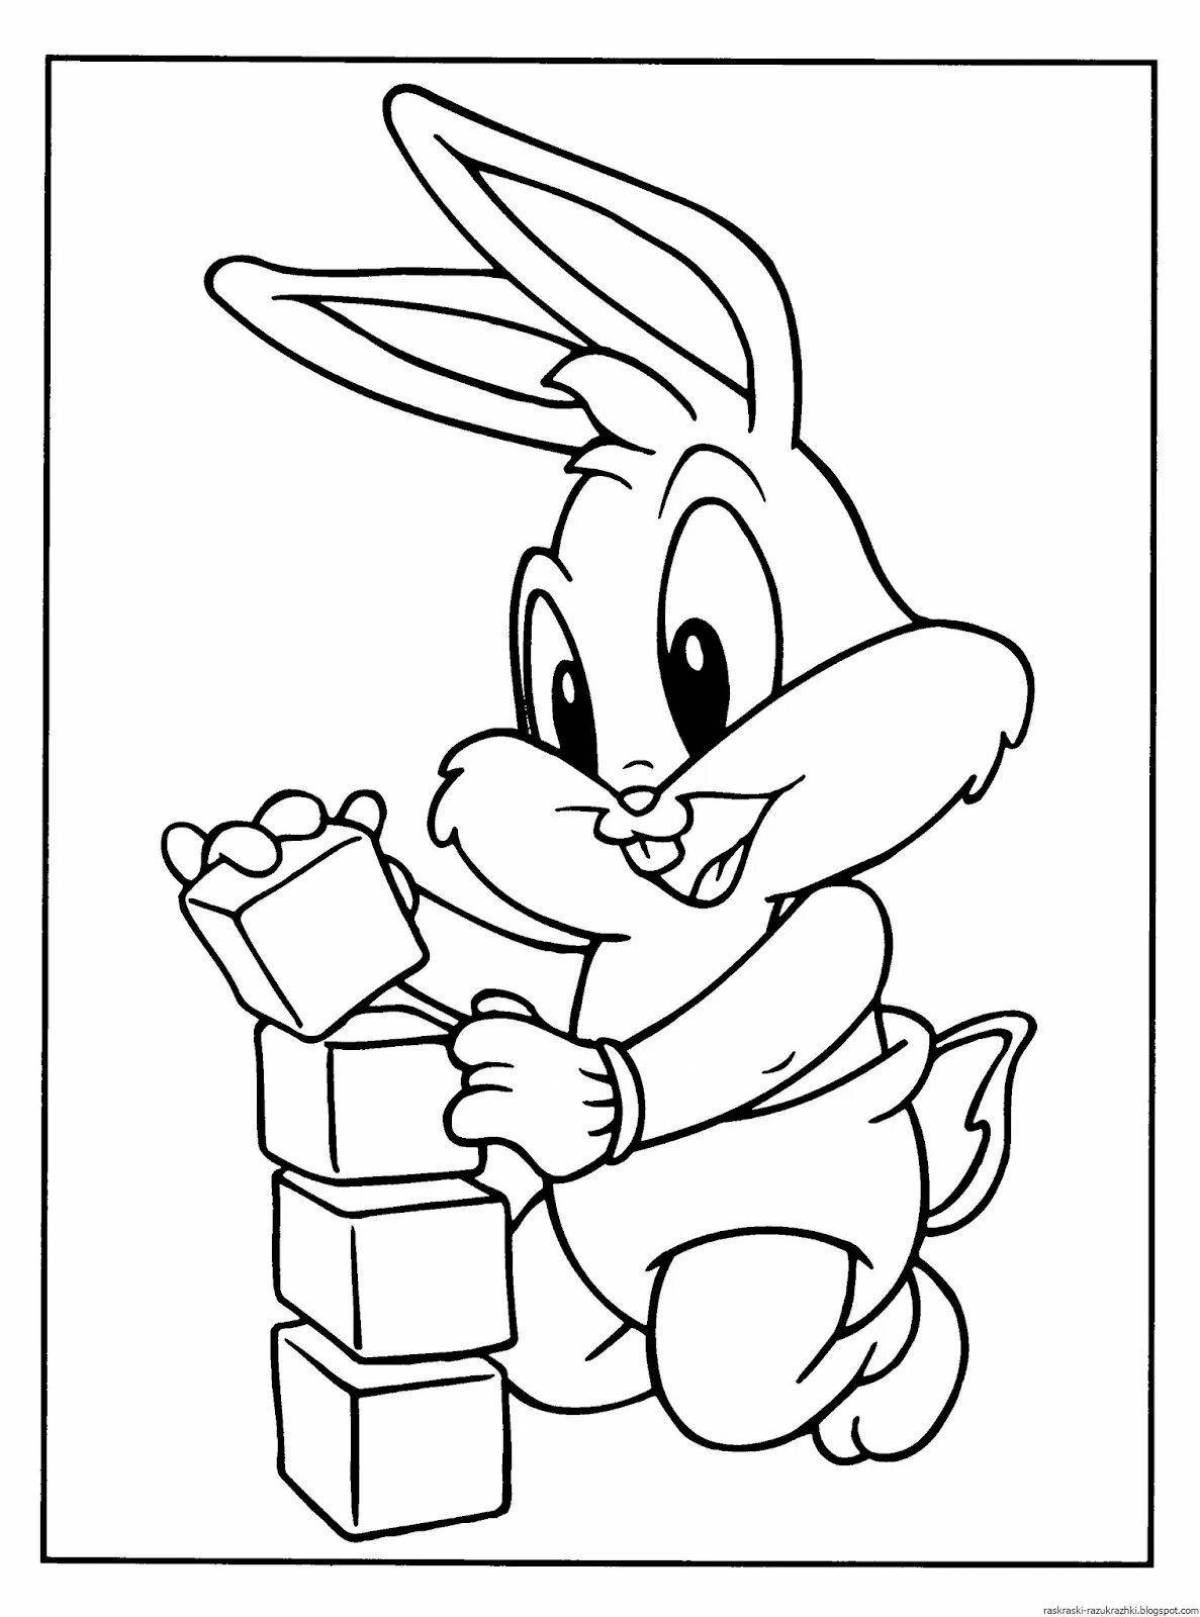 A fun coloring book popular with kids